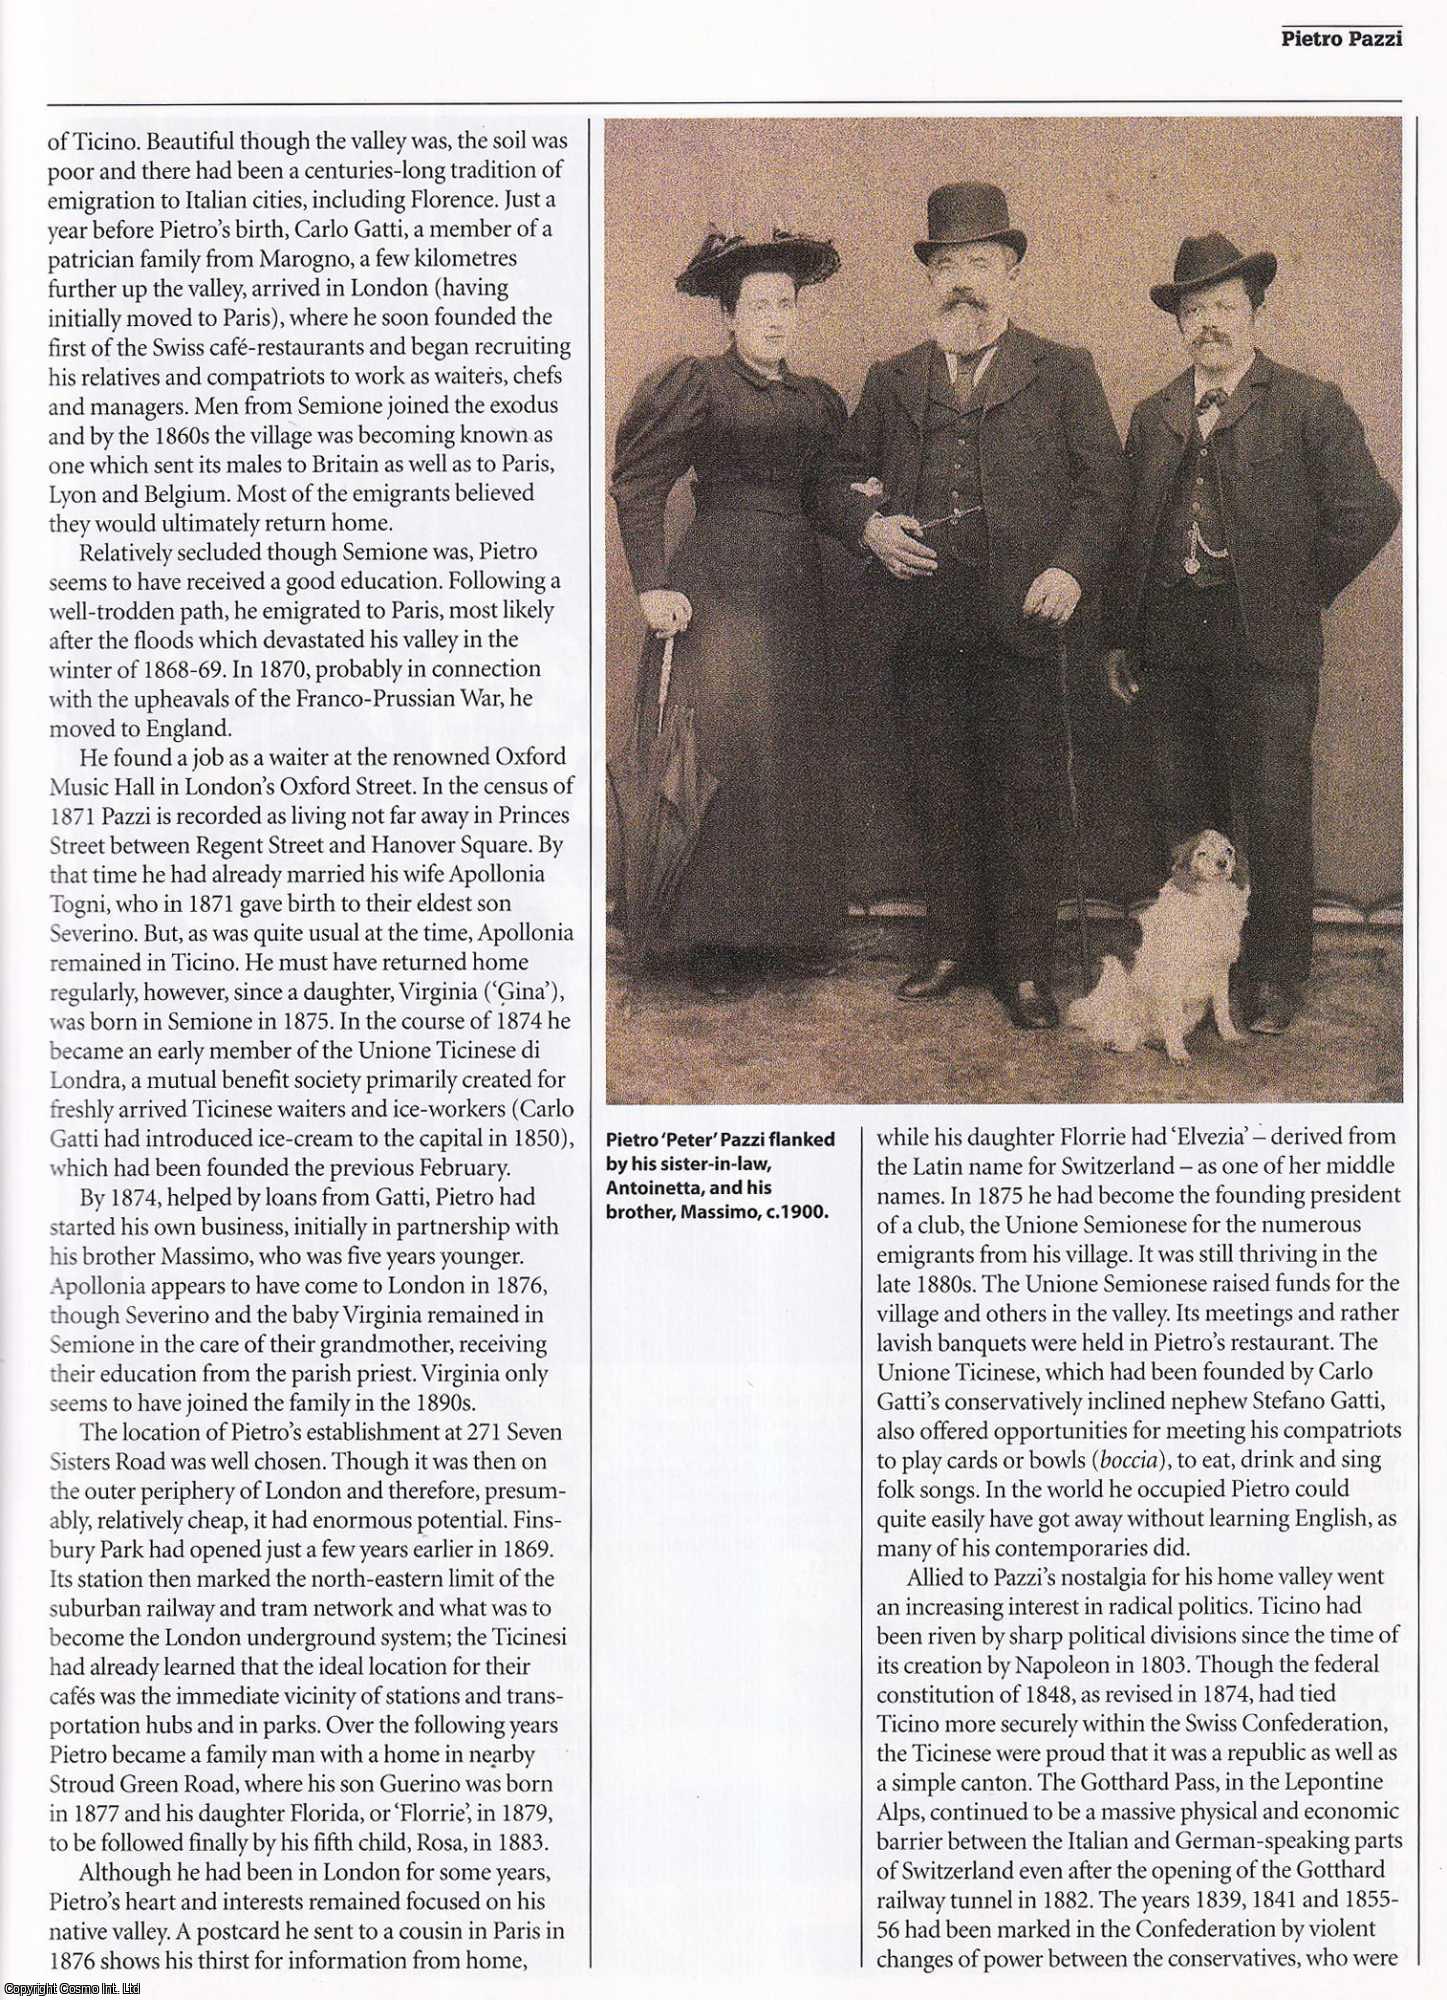 Peter Barber - The Making of an Englishman; Pietro Pazzi, 19th Century Immigrant. An original article from History Today magazine, 2010.